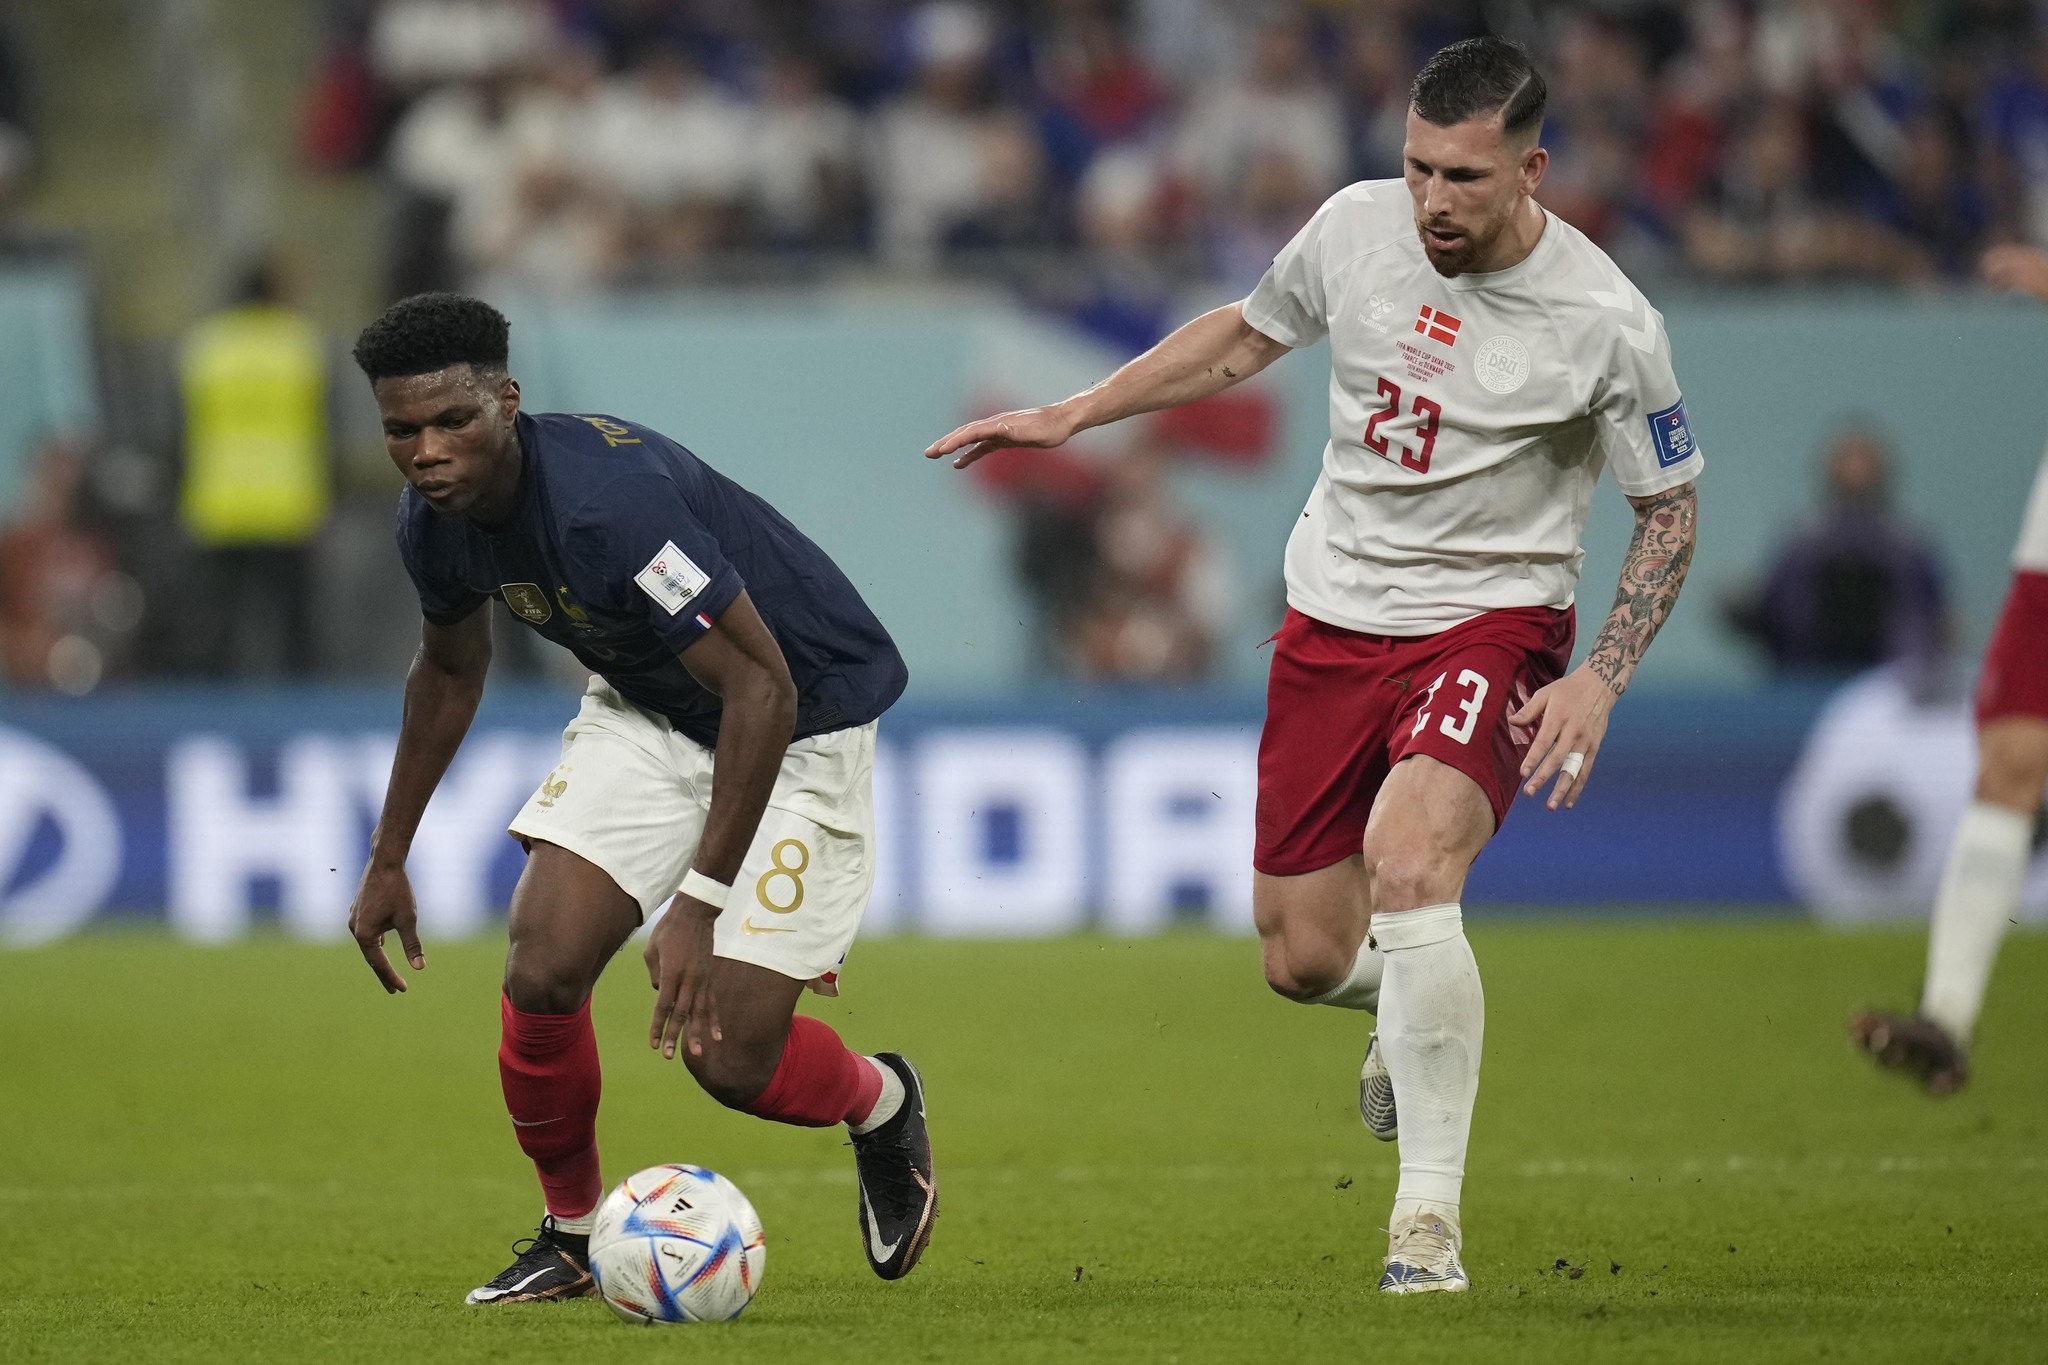 France's Aurelien  lt;HIT gt;Tchouameni lt;/HIT gt;, left, competes for the ball with Denmark's Pierre-Emile Hojbjerg during the World Cup group D soccer match between France and Denmark, at the Stadium 974 in Doha, Qatar, Saturday, Nov. 26, 2022. (AP Photo/Christophe Ena)